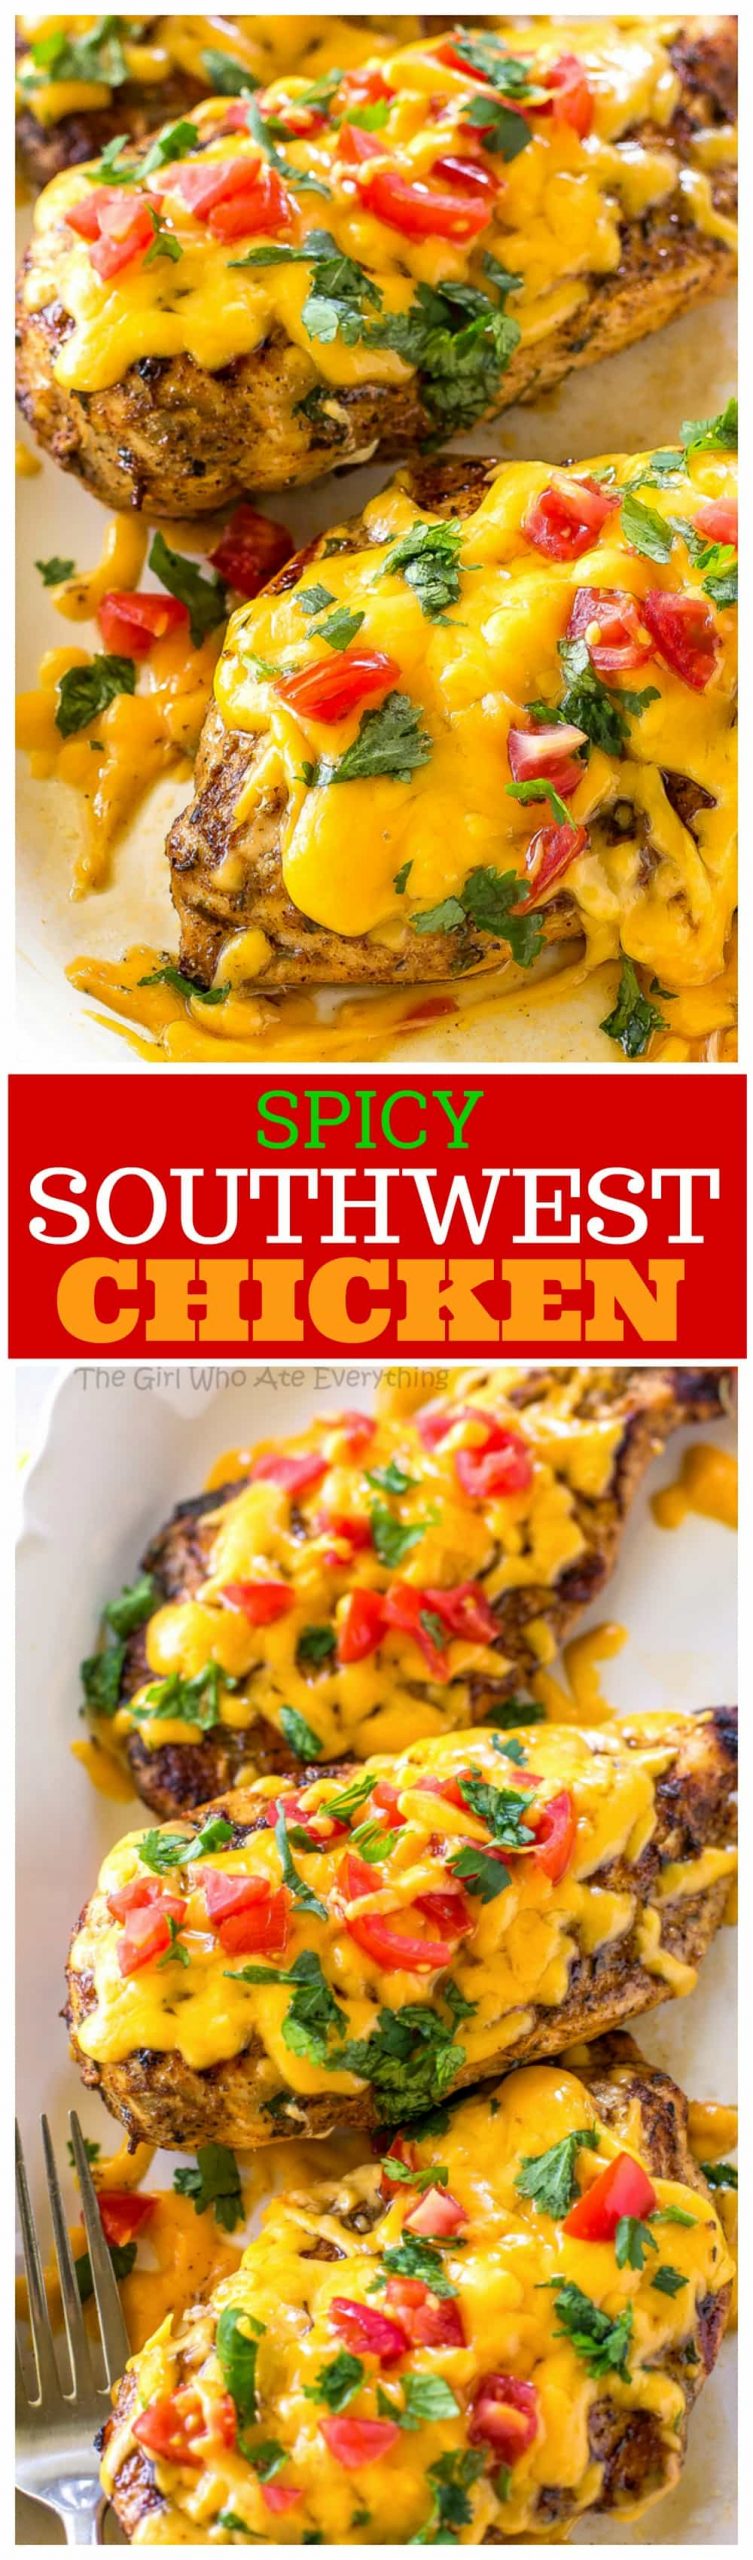 Spicy Southwest Chicken - marinated in spicy seasonings, grilled, and topped with cheese and tomatoes. #mexican #chicken #dinner #easy